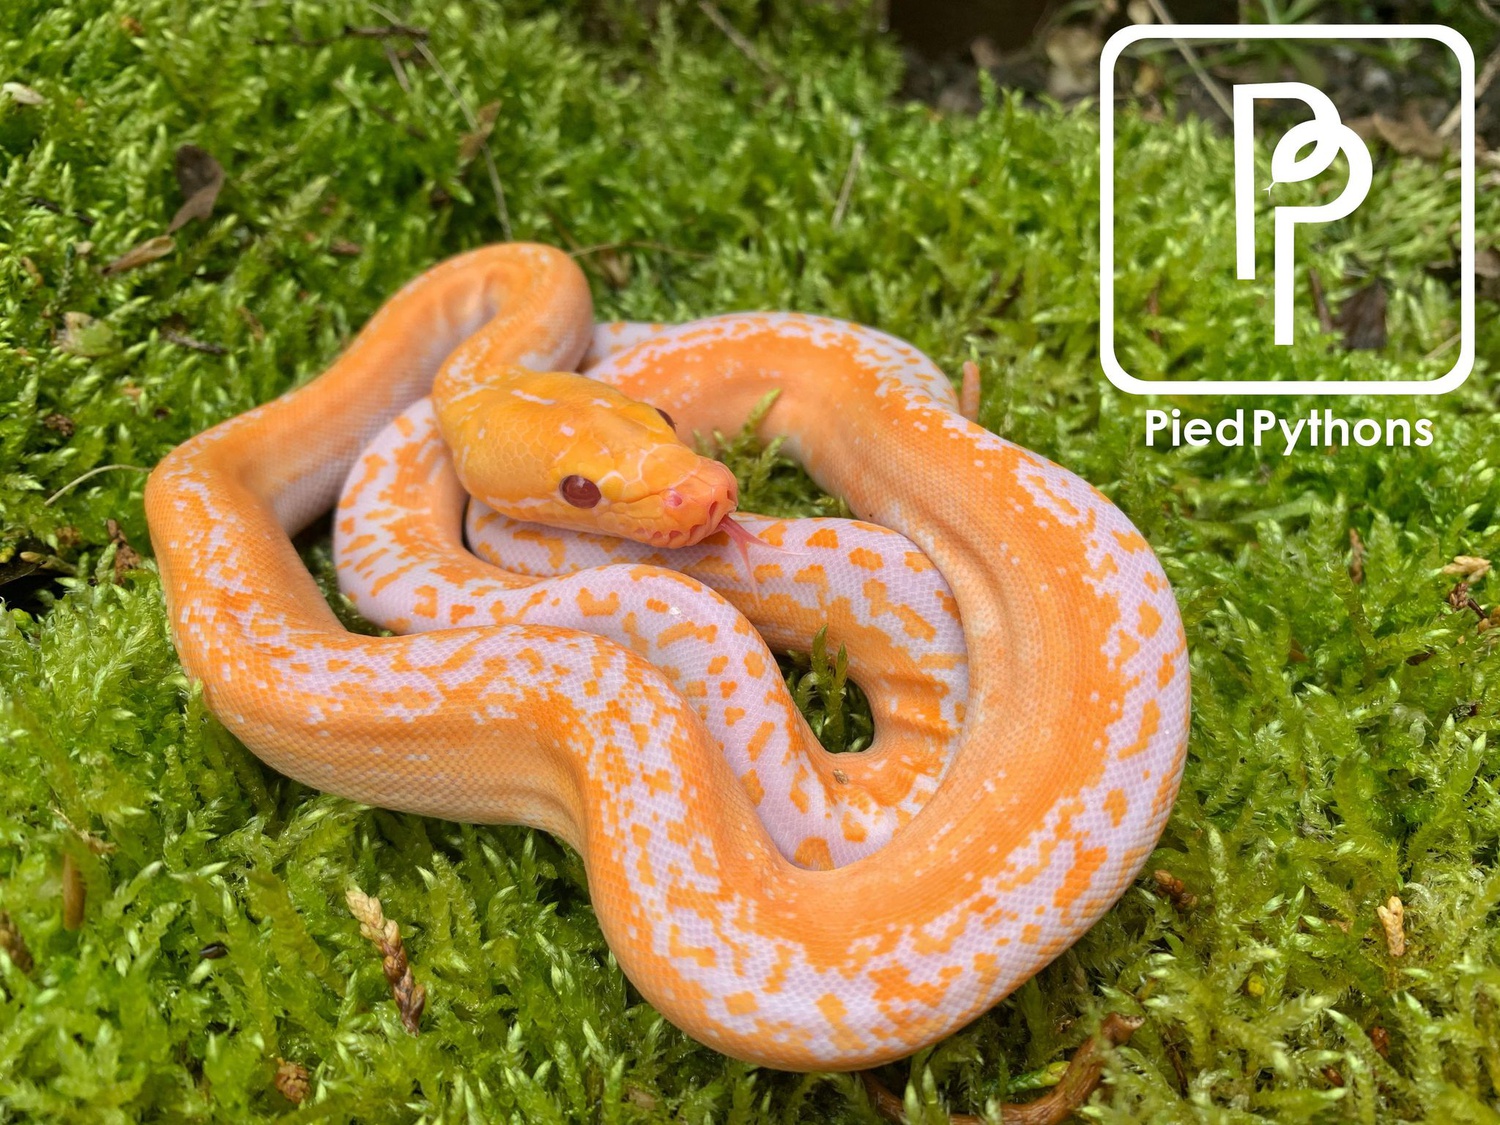 Albino Pied Reticulated Python by Pied Pythons